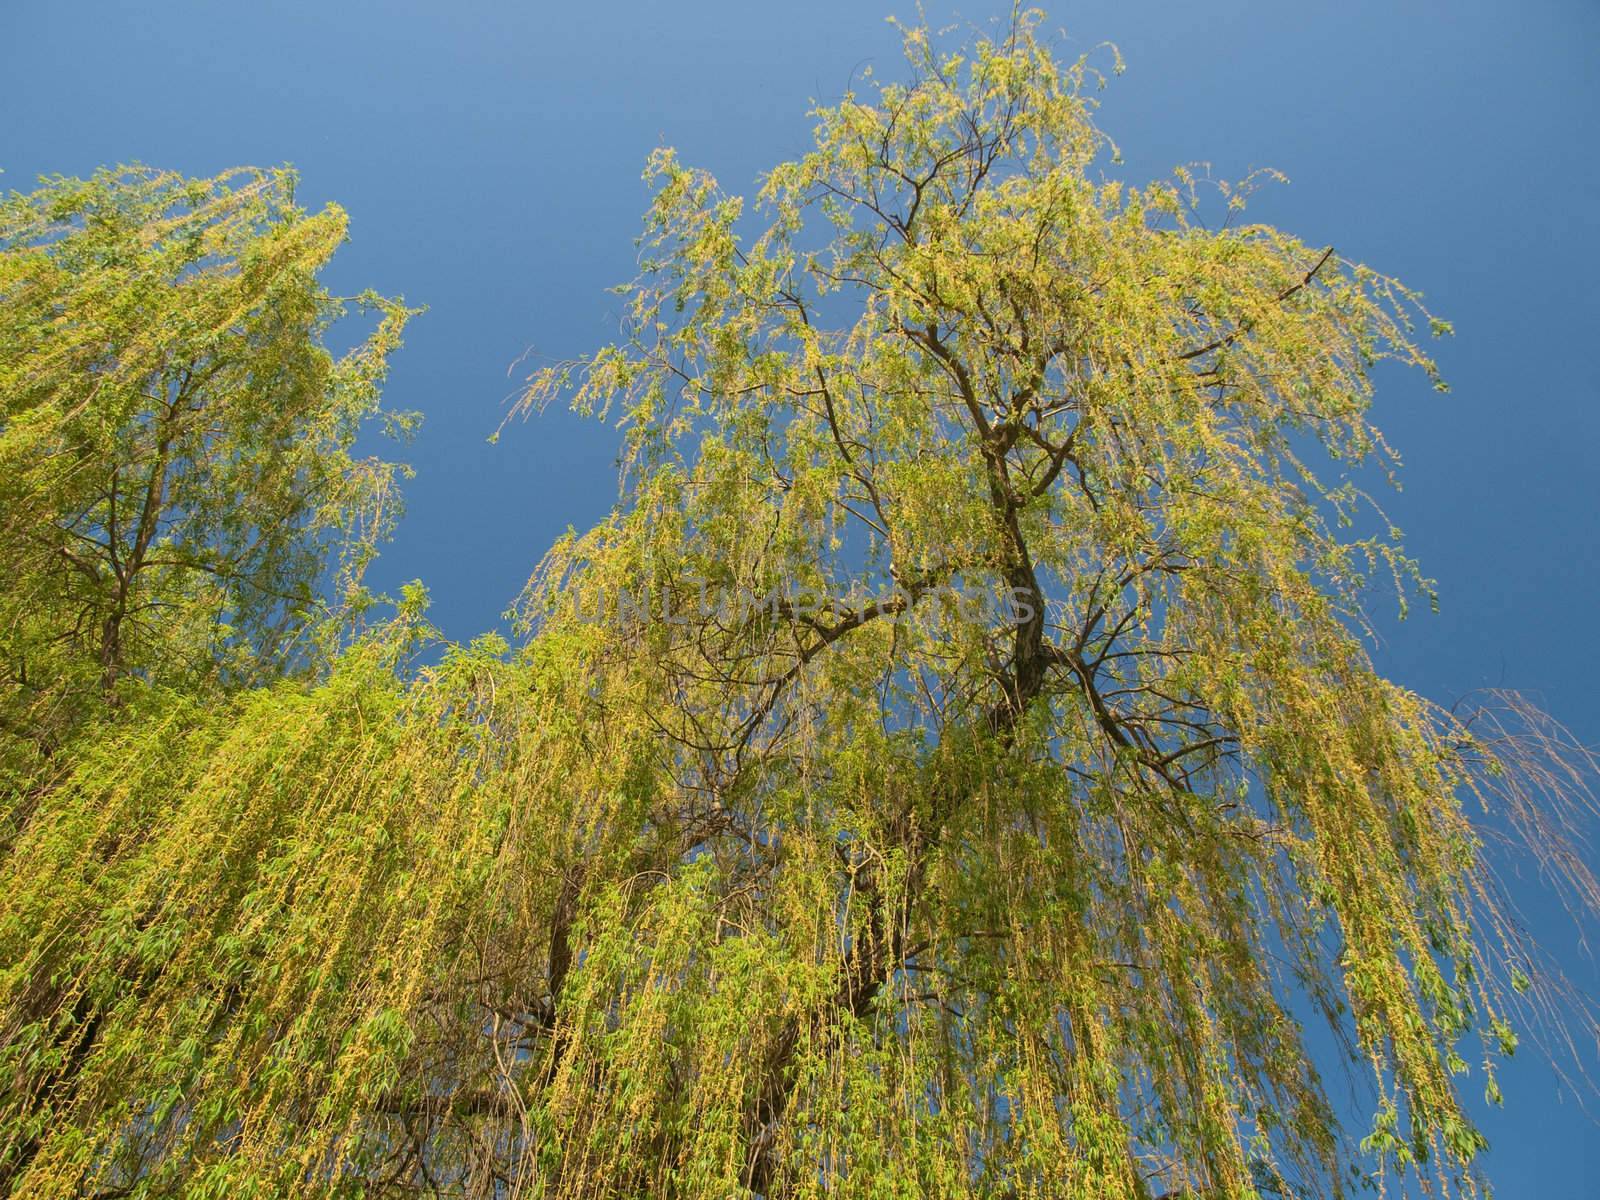 Willow tree against blue sky